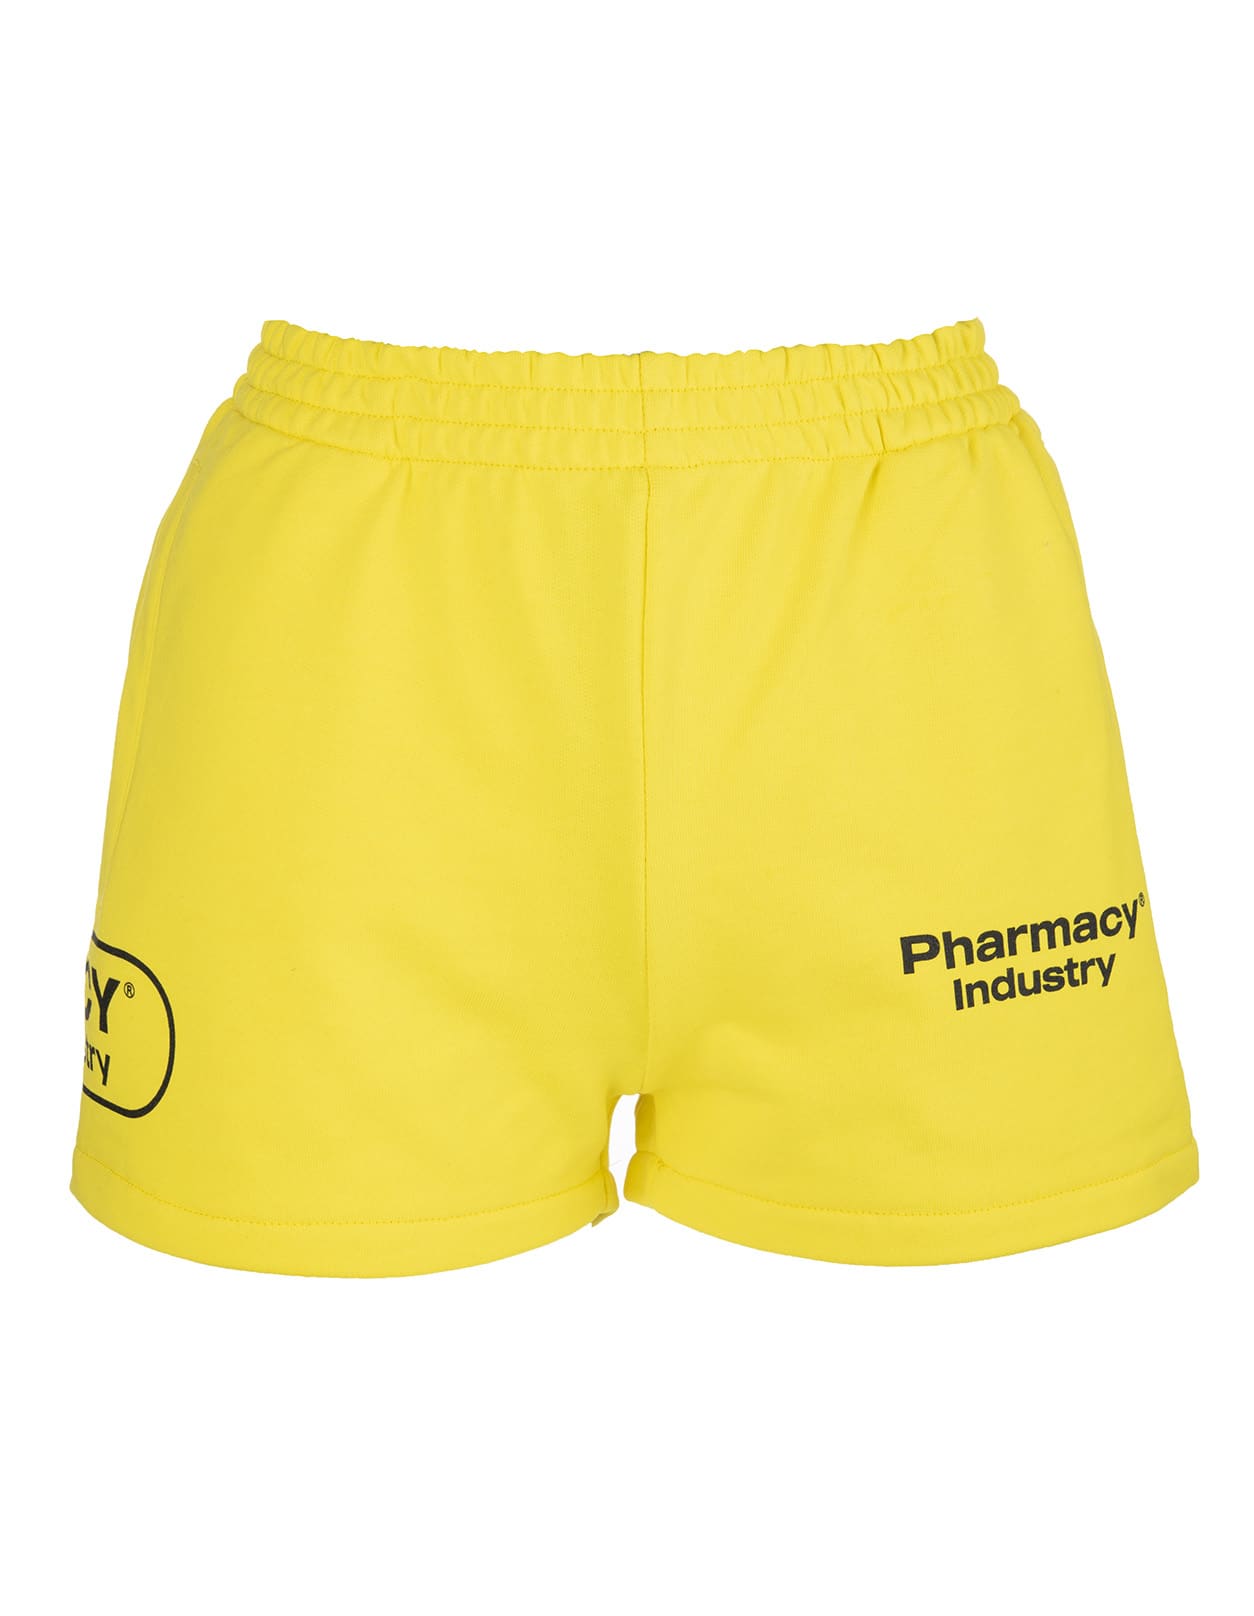 Pharmacy Industry Woman Yellow Shorts With Logos | ModeSens